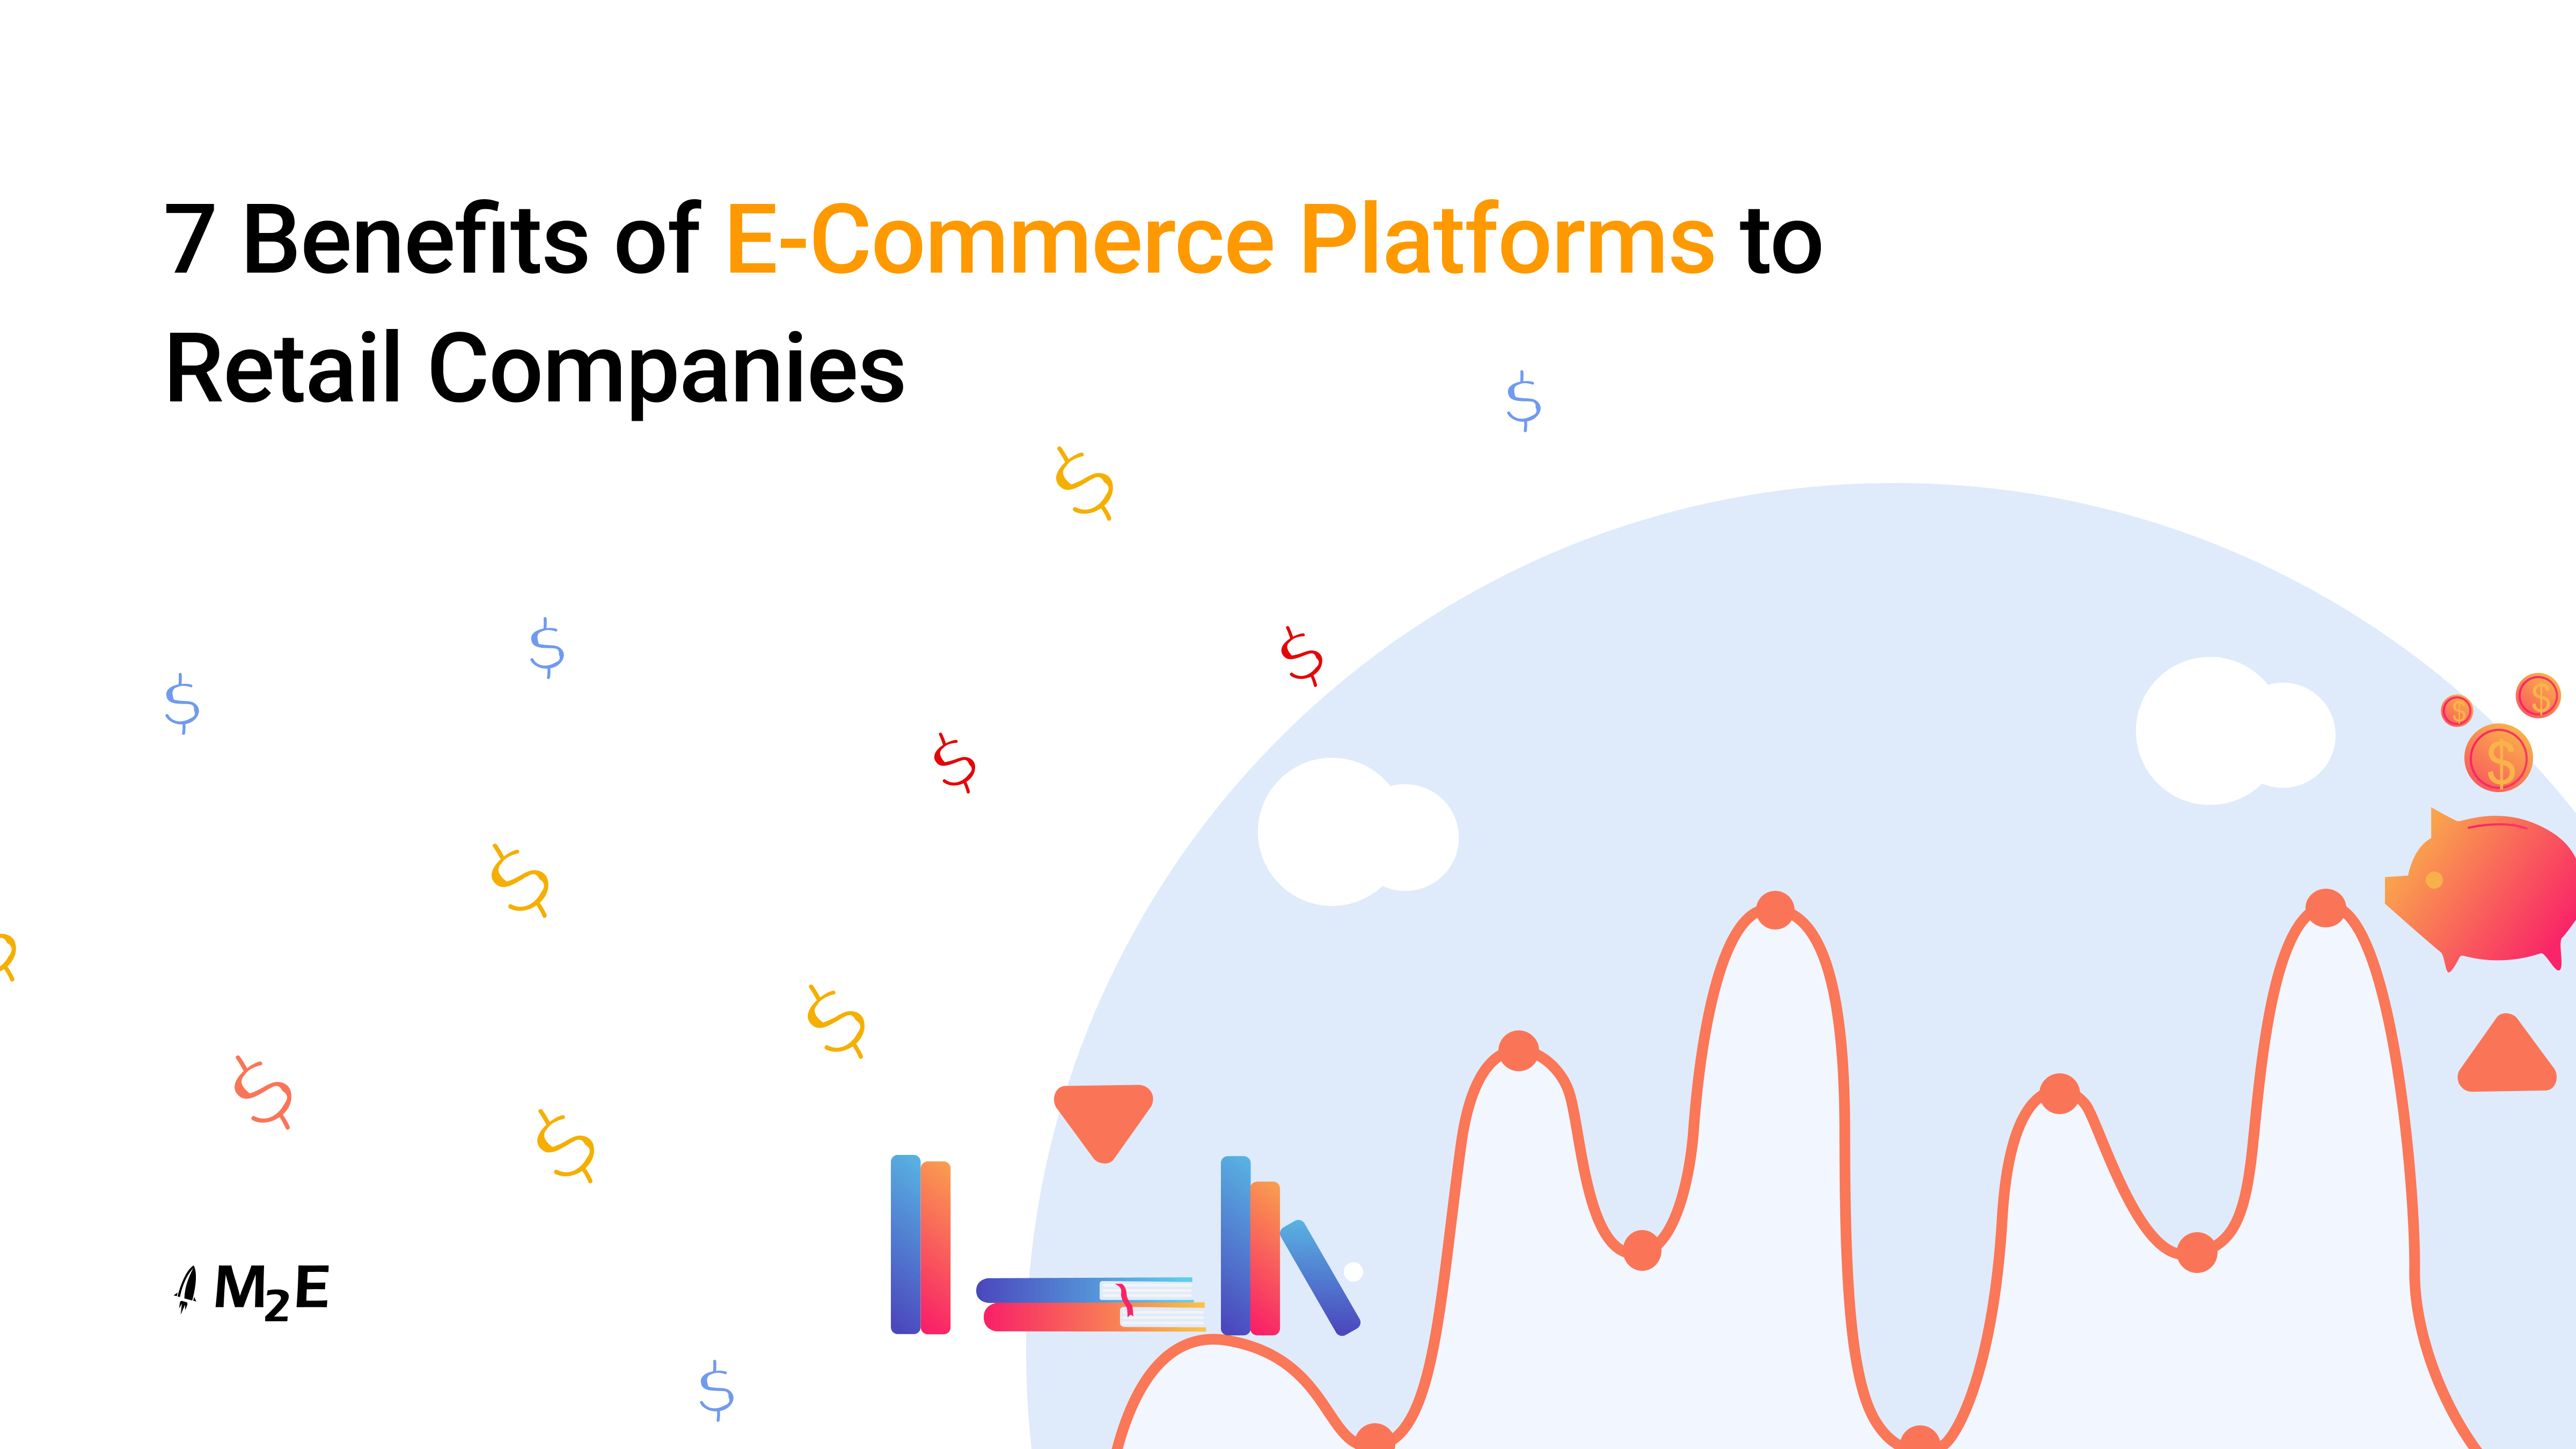 7 Benefits of E-Commerce Platforms to Retail Companies